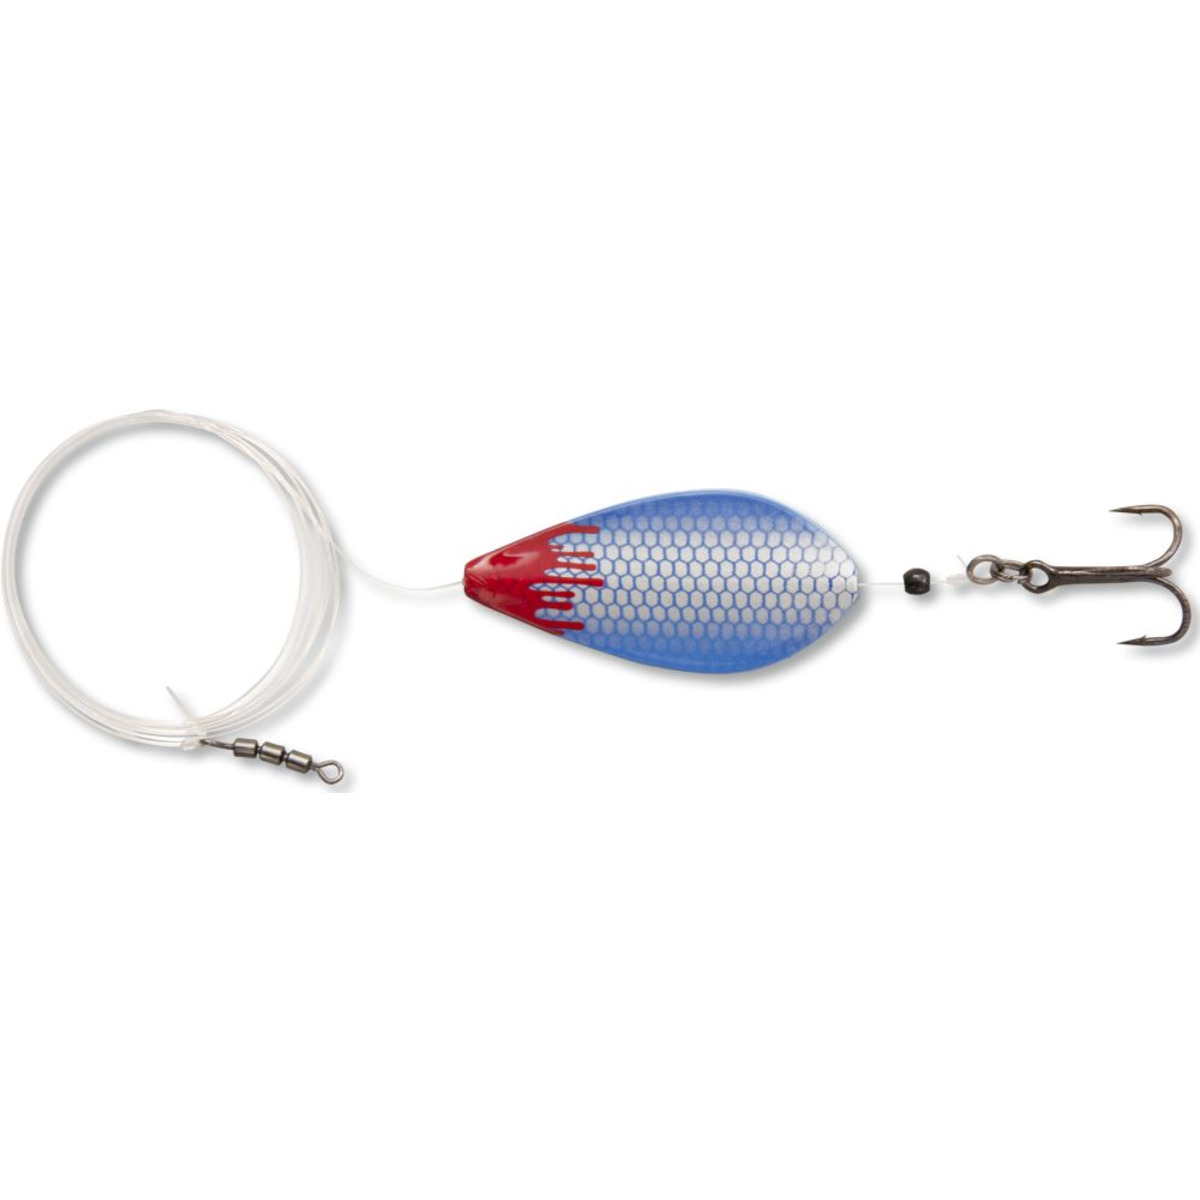 Magic Trout Fat Bloody Inliner - silver/blue